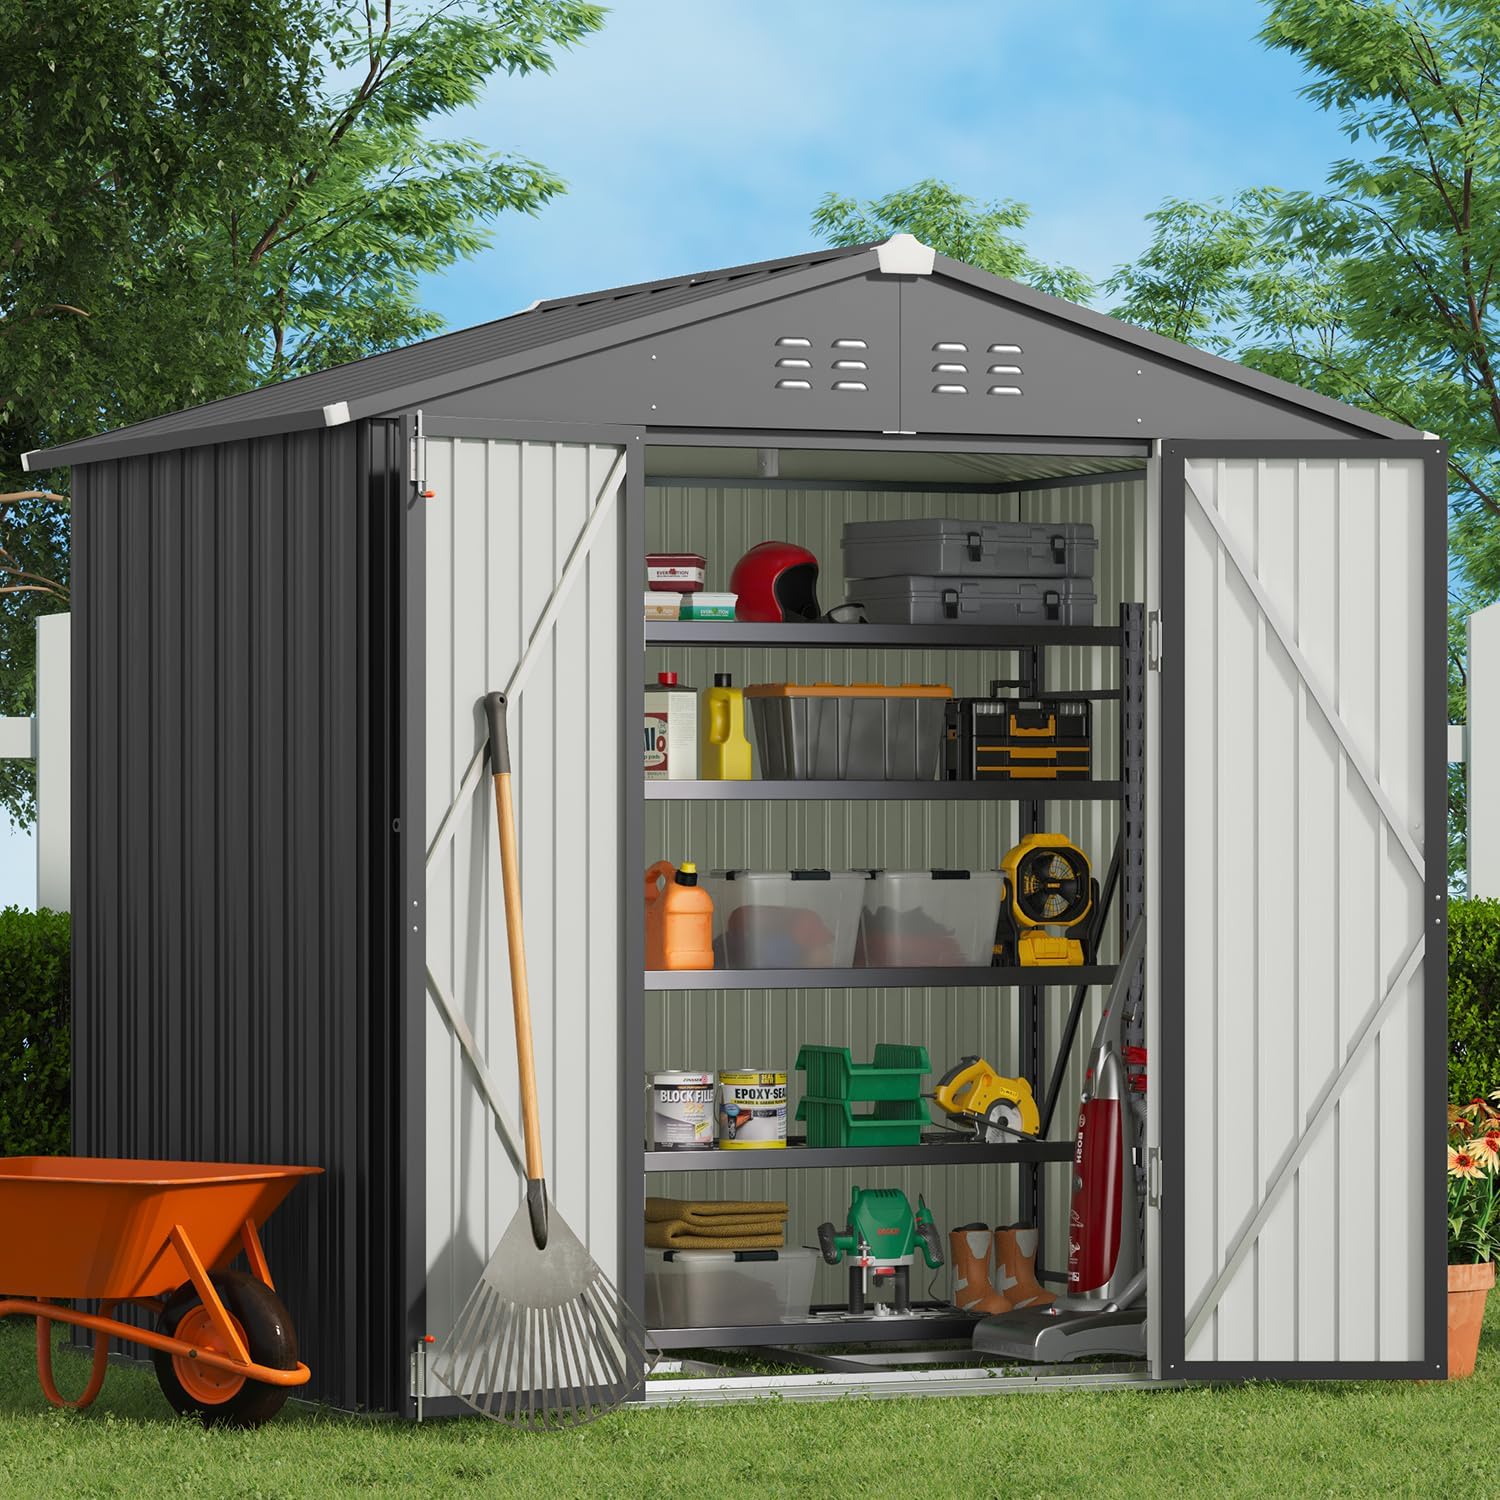 How Much Is A Storage Shed